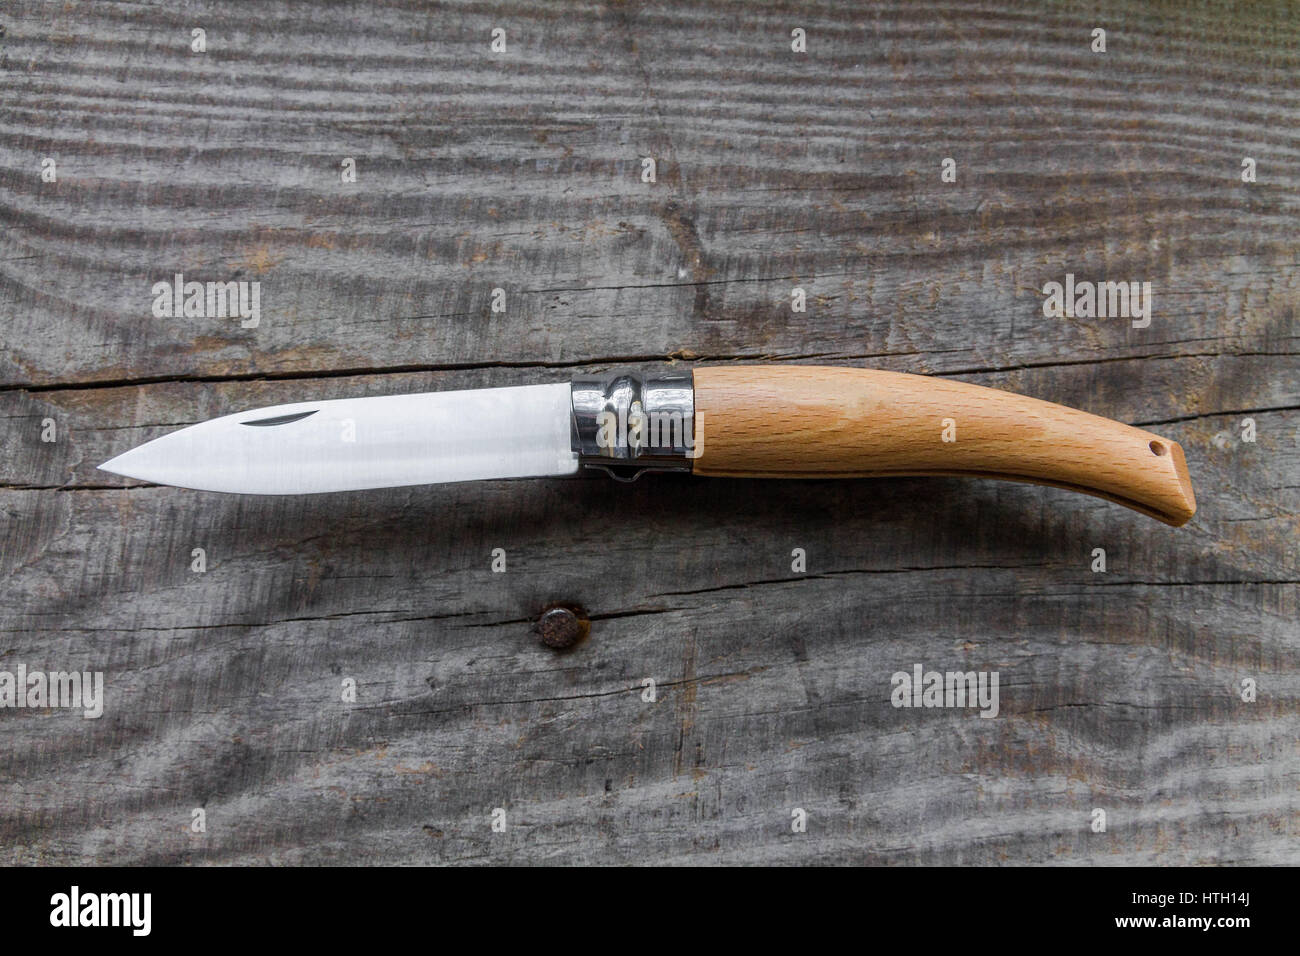 Pocket knife with a wooden handle. The knife is placed diagonally. Wooden background. Stock Photo